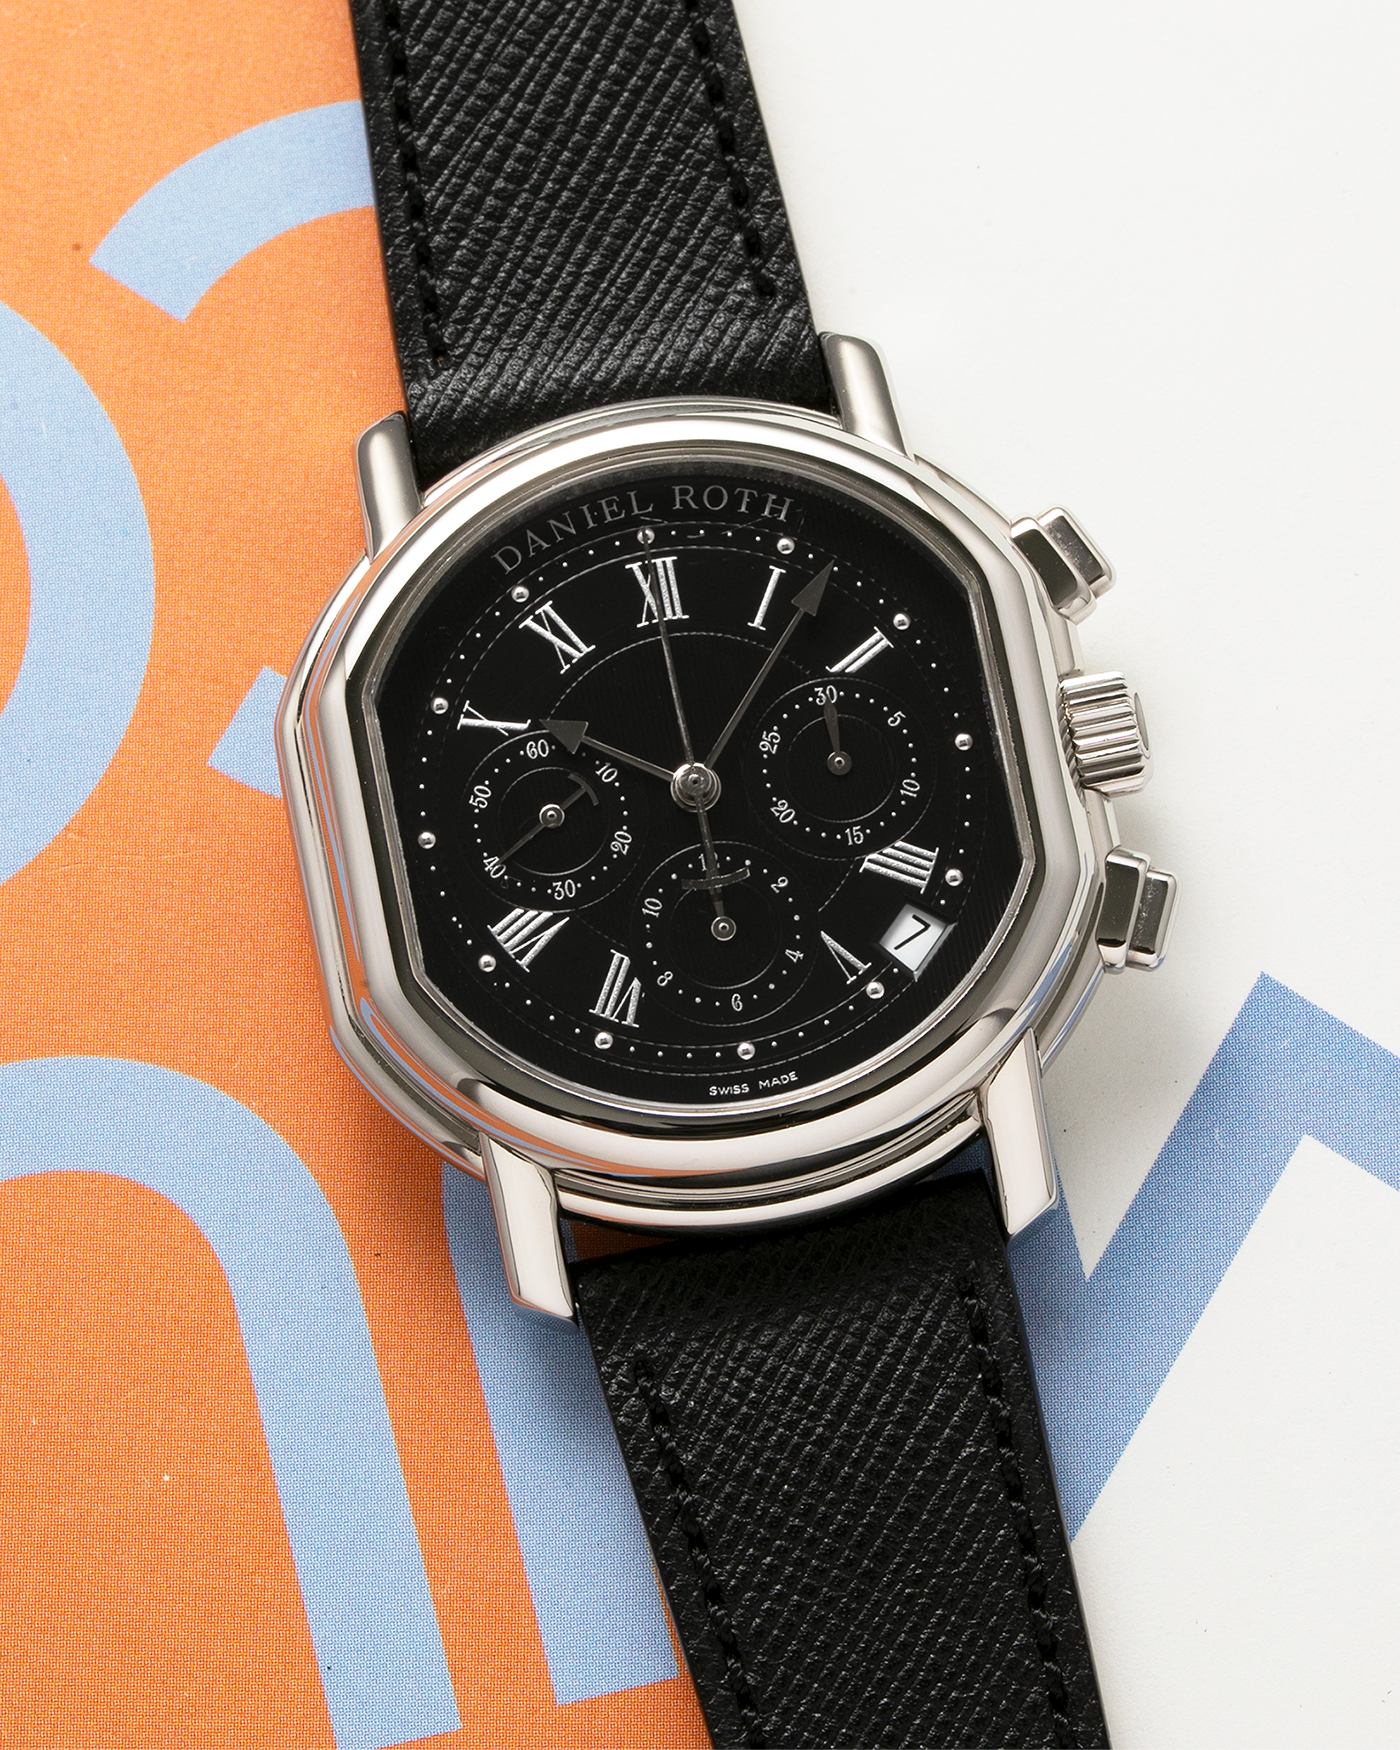 Brand: Daniel Roth Year: Late 1990’s Model: Masters Chronograph S247 Material: Stainless Steel Movement: Zenith El Primero Cal. 400, Self-Winding Case Diameter: 38.5mm x 41.5mm Strap: Molequin Black Grained Calf and Daniel Roth Stainless Steel Tang Buckle